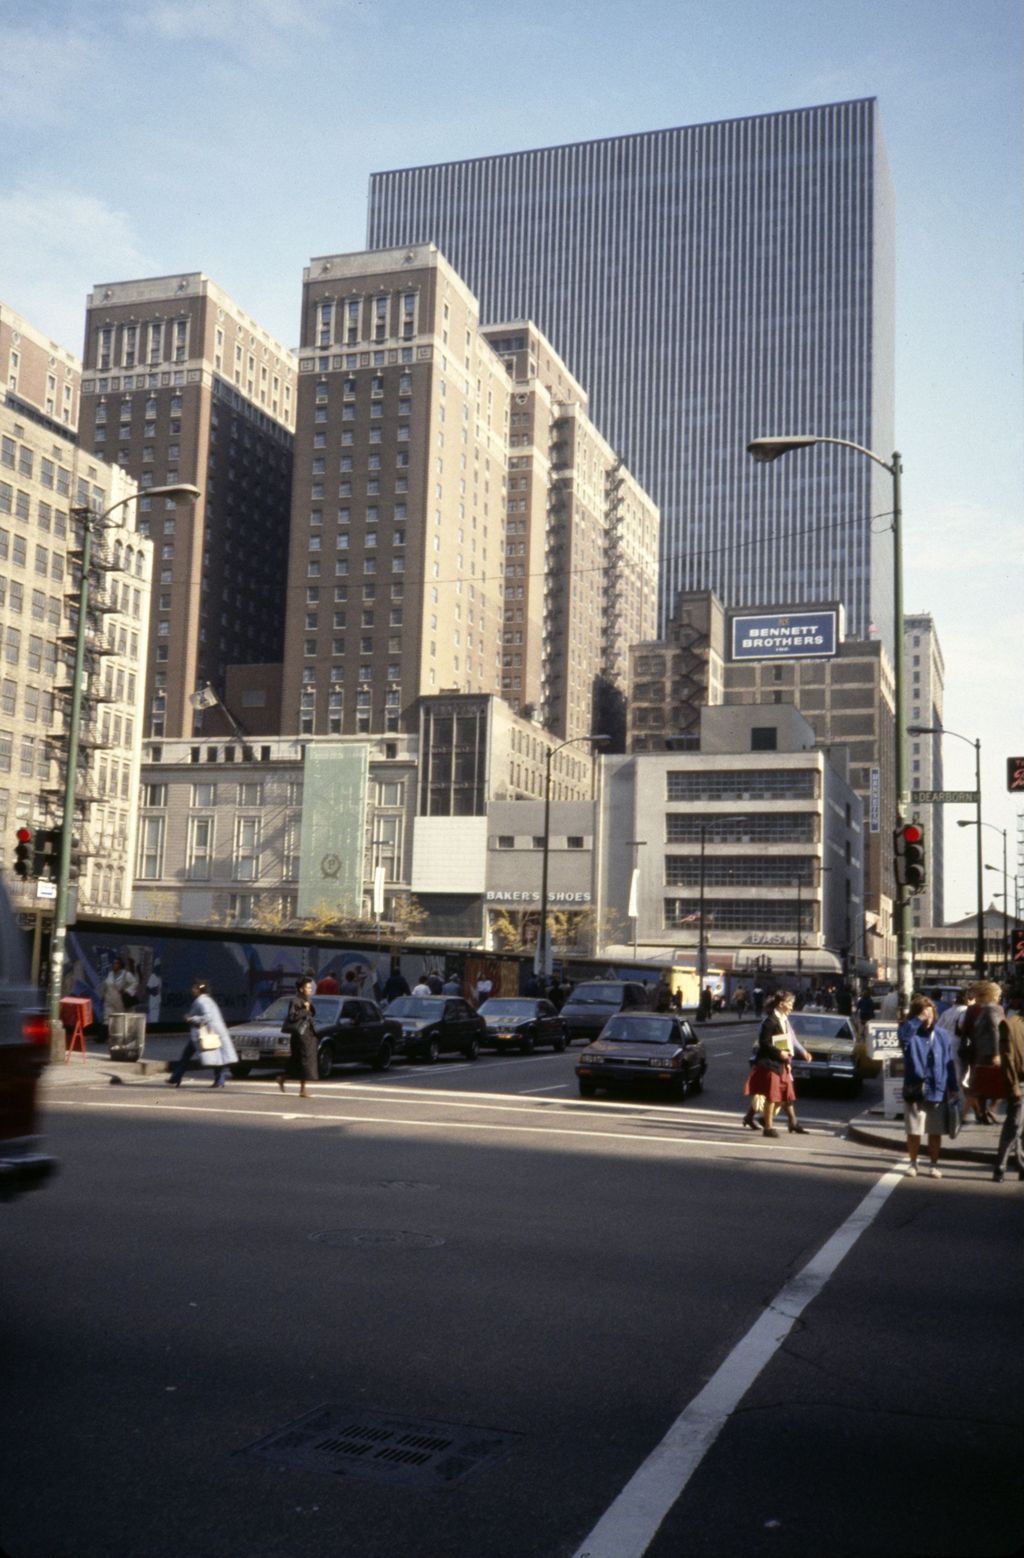 Loop buildings from Dearborn and Adams Streets